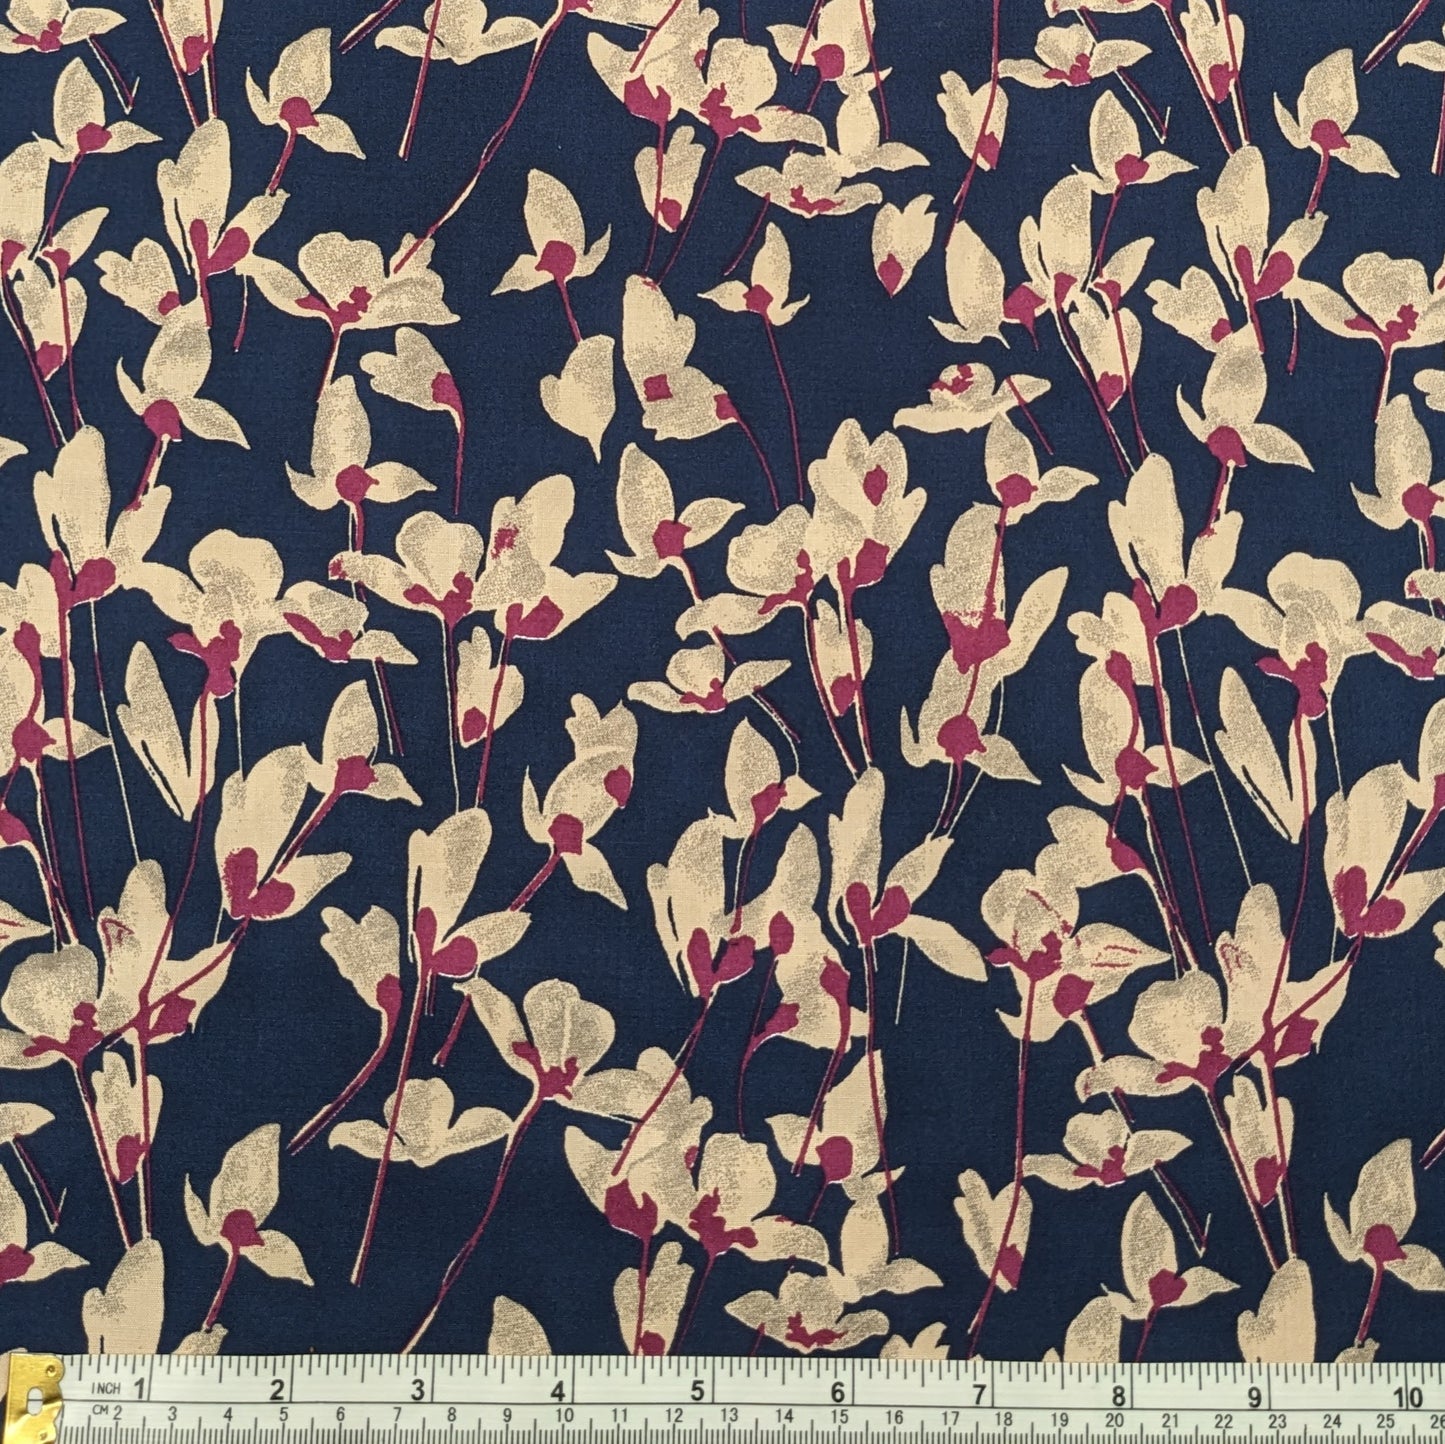 Viscose/Tencel Fabric - Navy and Plum Floral